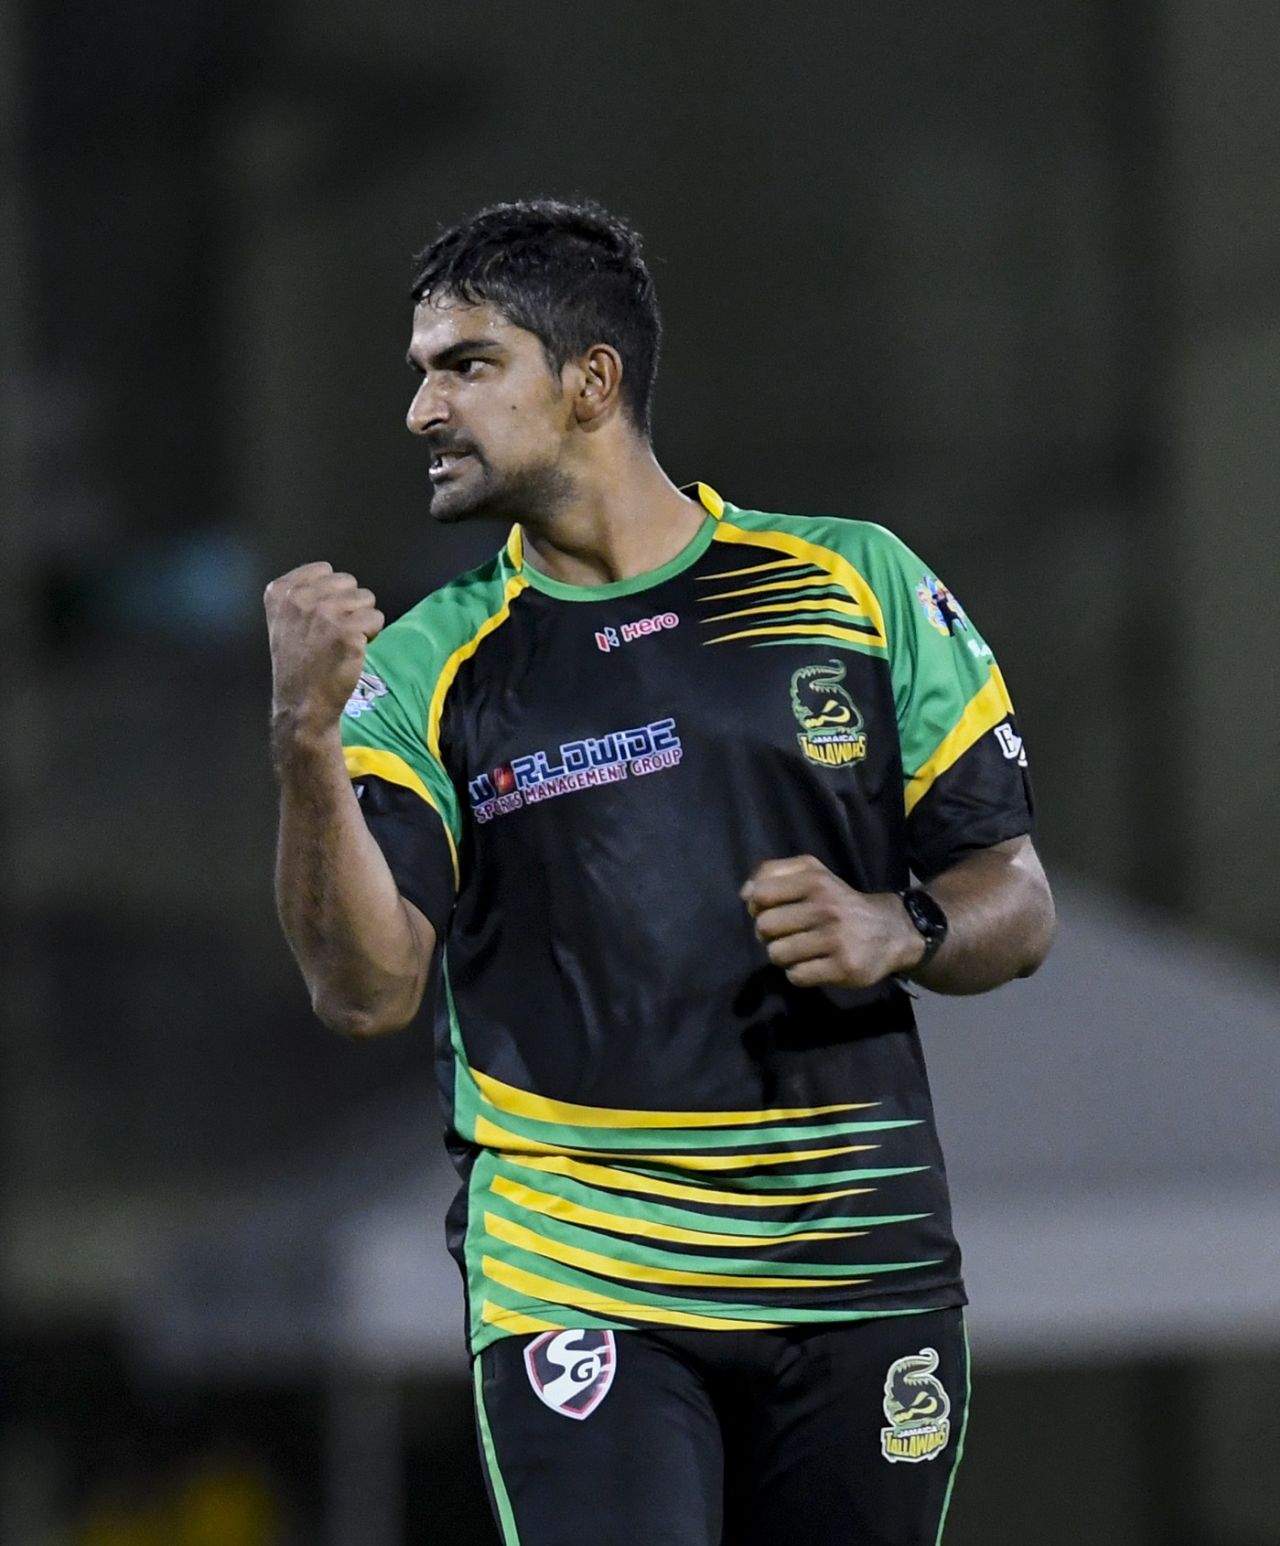 Ish Sodhi is pumped up after taking a wicket, Guyana Amazon Warriors v Jamaica Tallawahs, CPL 2018, Providence Stadium, September 8, 2018